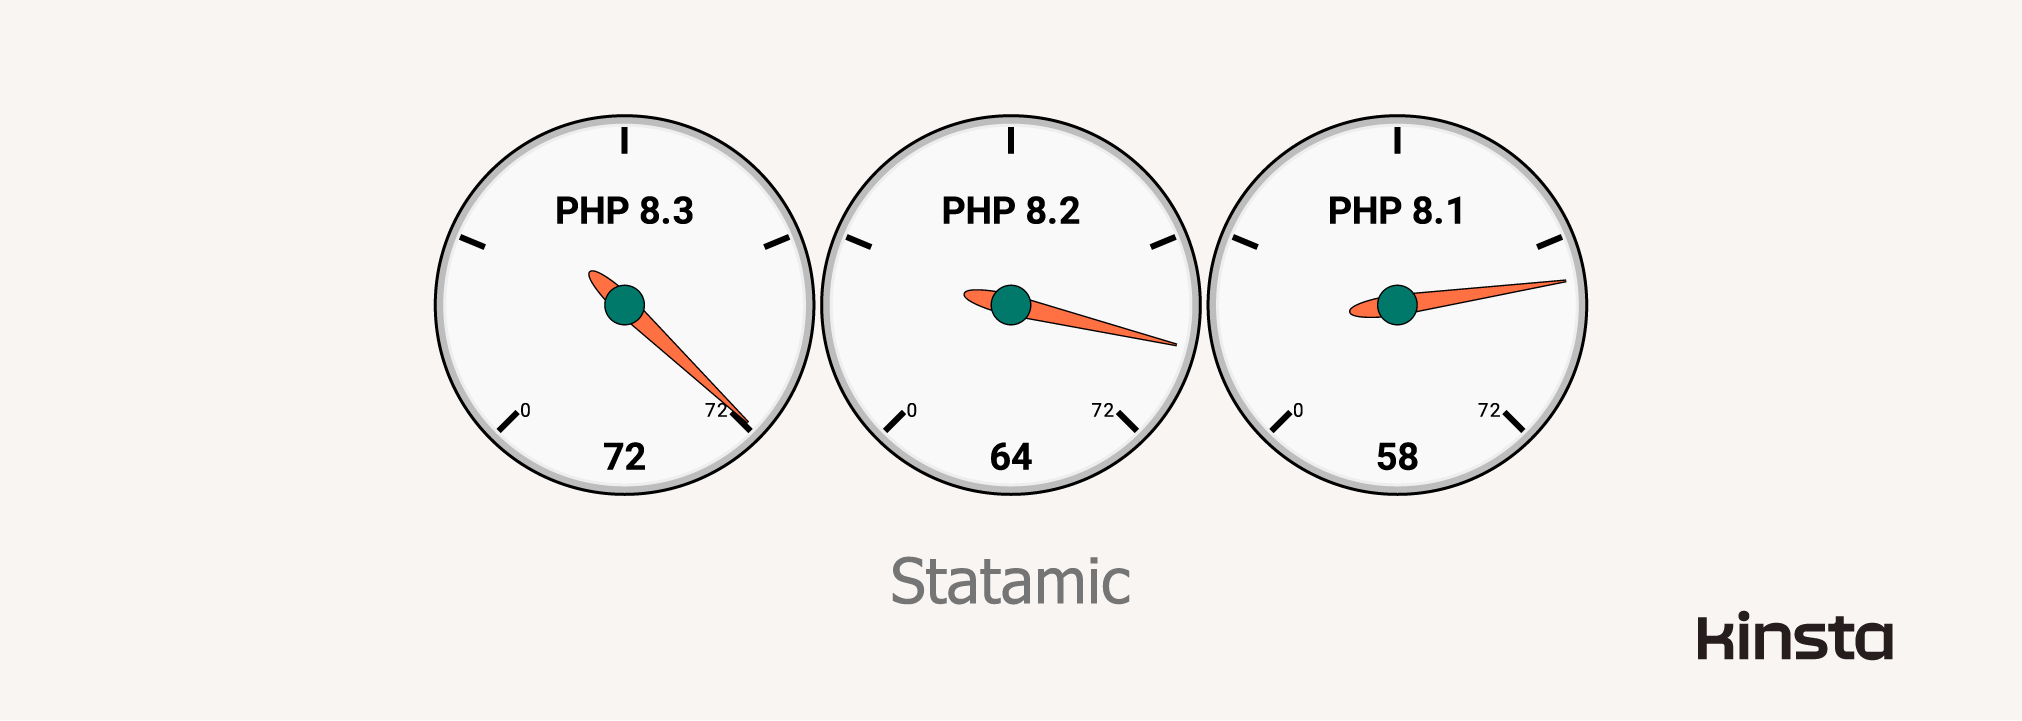 Statamic 4.13.2 performance on PHP 8.1, 8.2, and 8.3 (in requests/second).